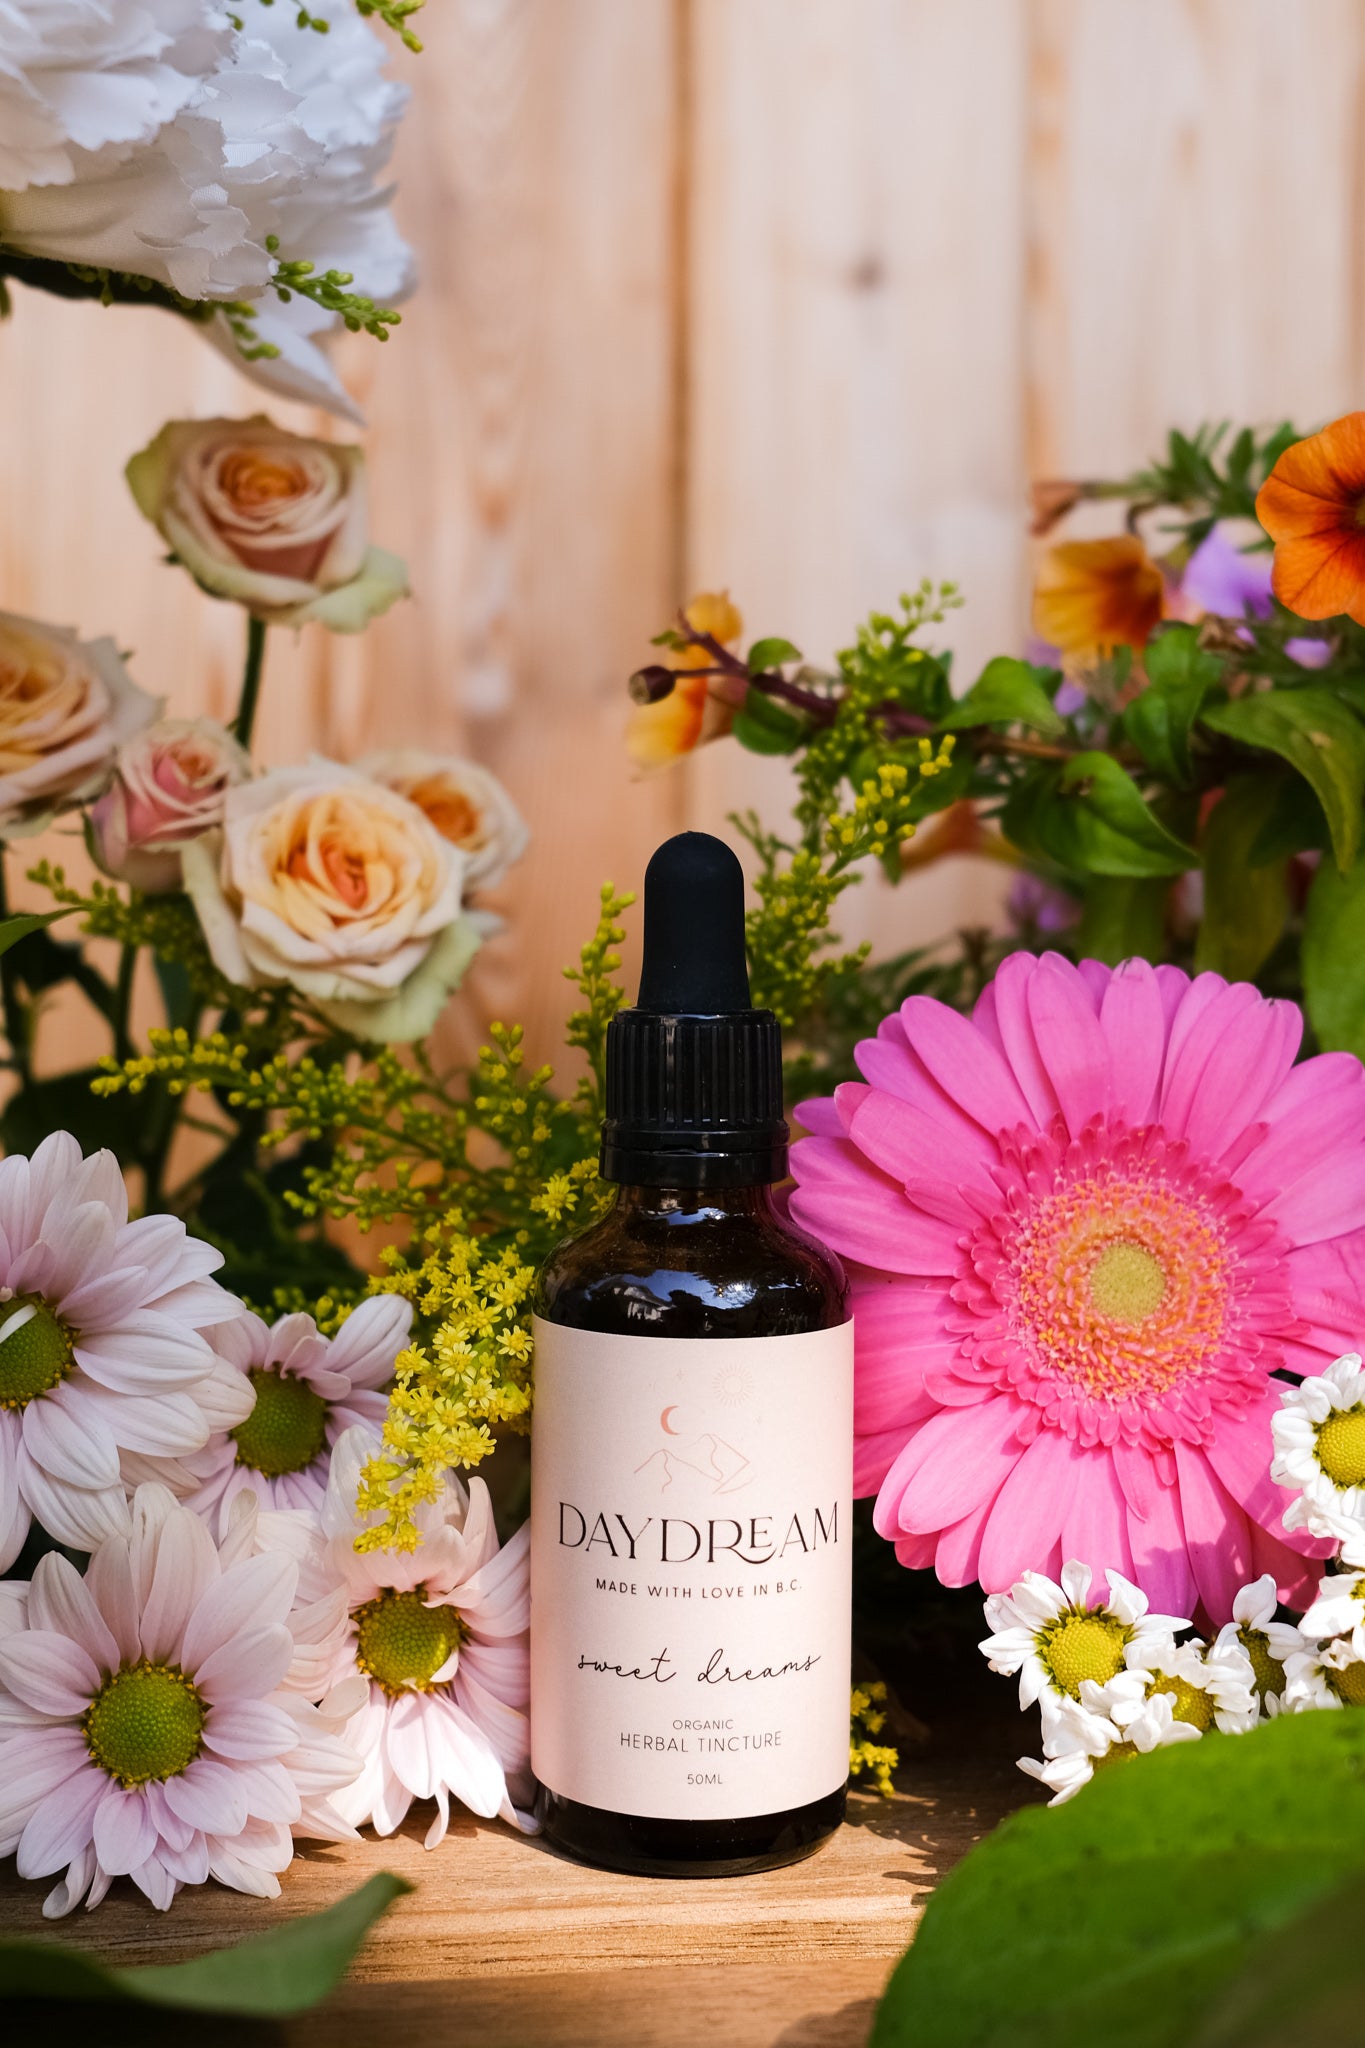 Our Sweet Dreams herbal tincture is blend of Valerian, Lemon Balm and Hops and has been formulated to help you drift off to sleep with ease by relieving difficulty falling asleep, nervous tension and feelings of restlessness. 